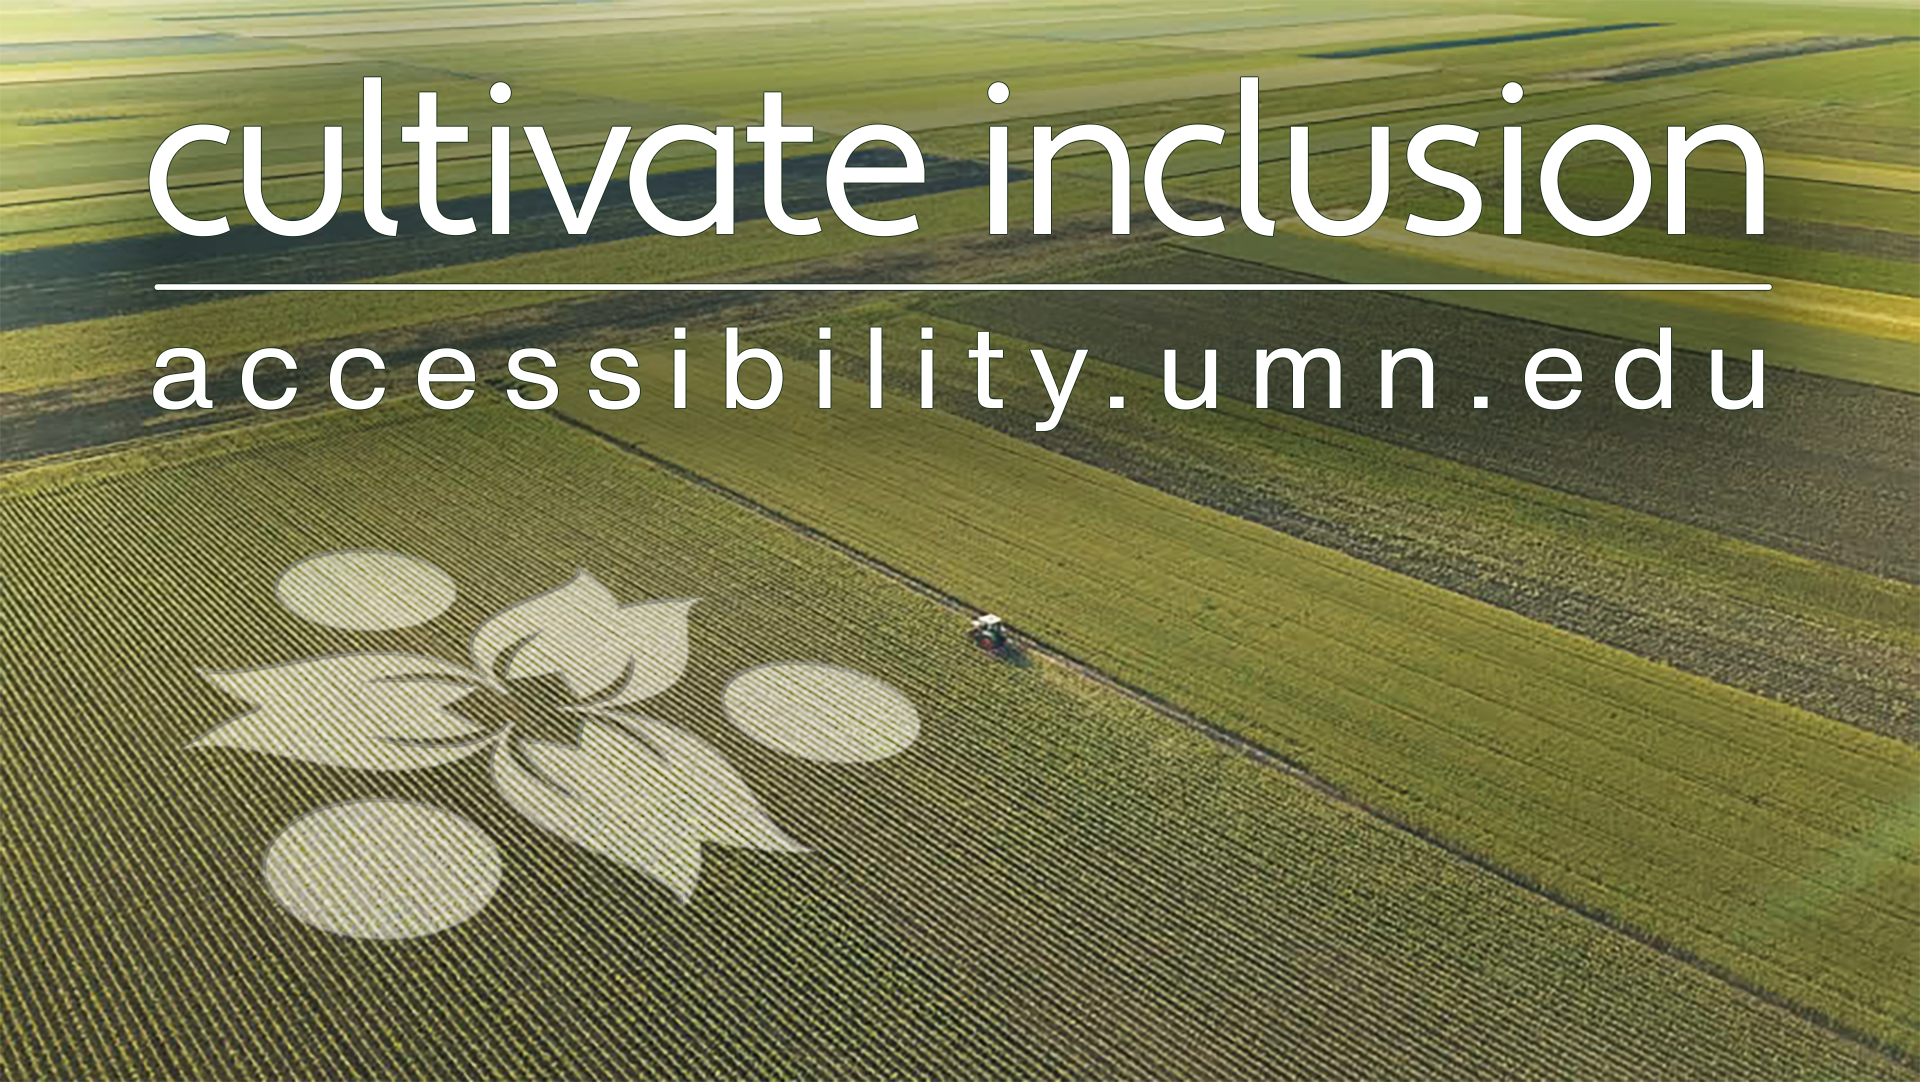 Aerial view of a farm field with crop art shaped like the cultivate inclusion logo and the url, "accessibility.umn.edu"